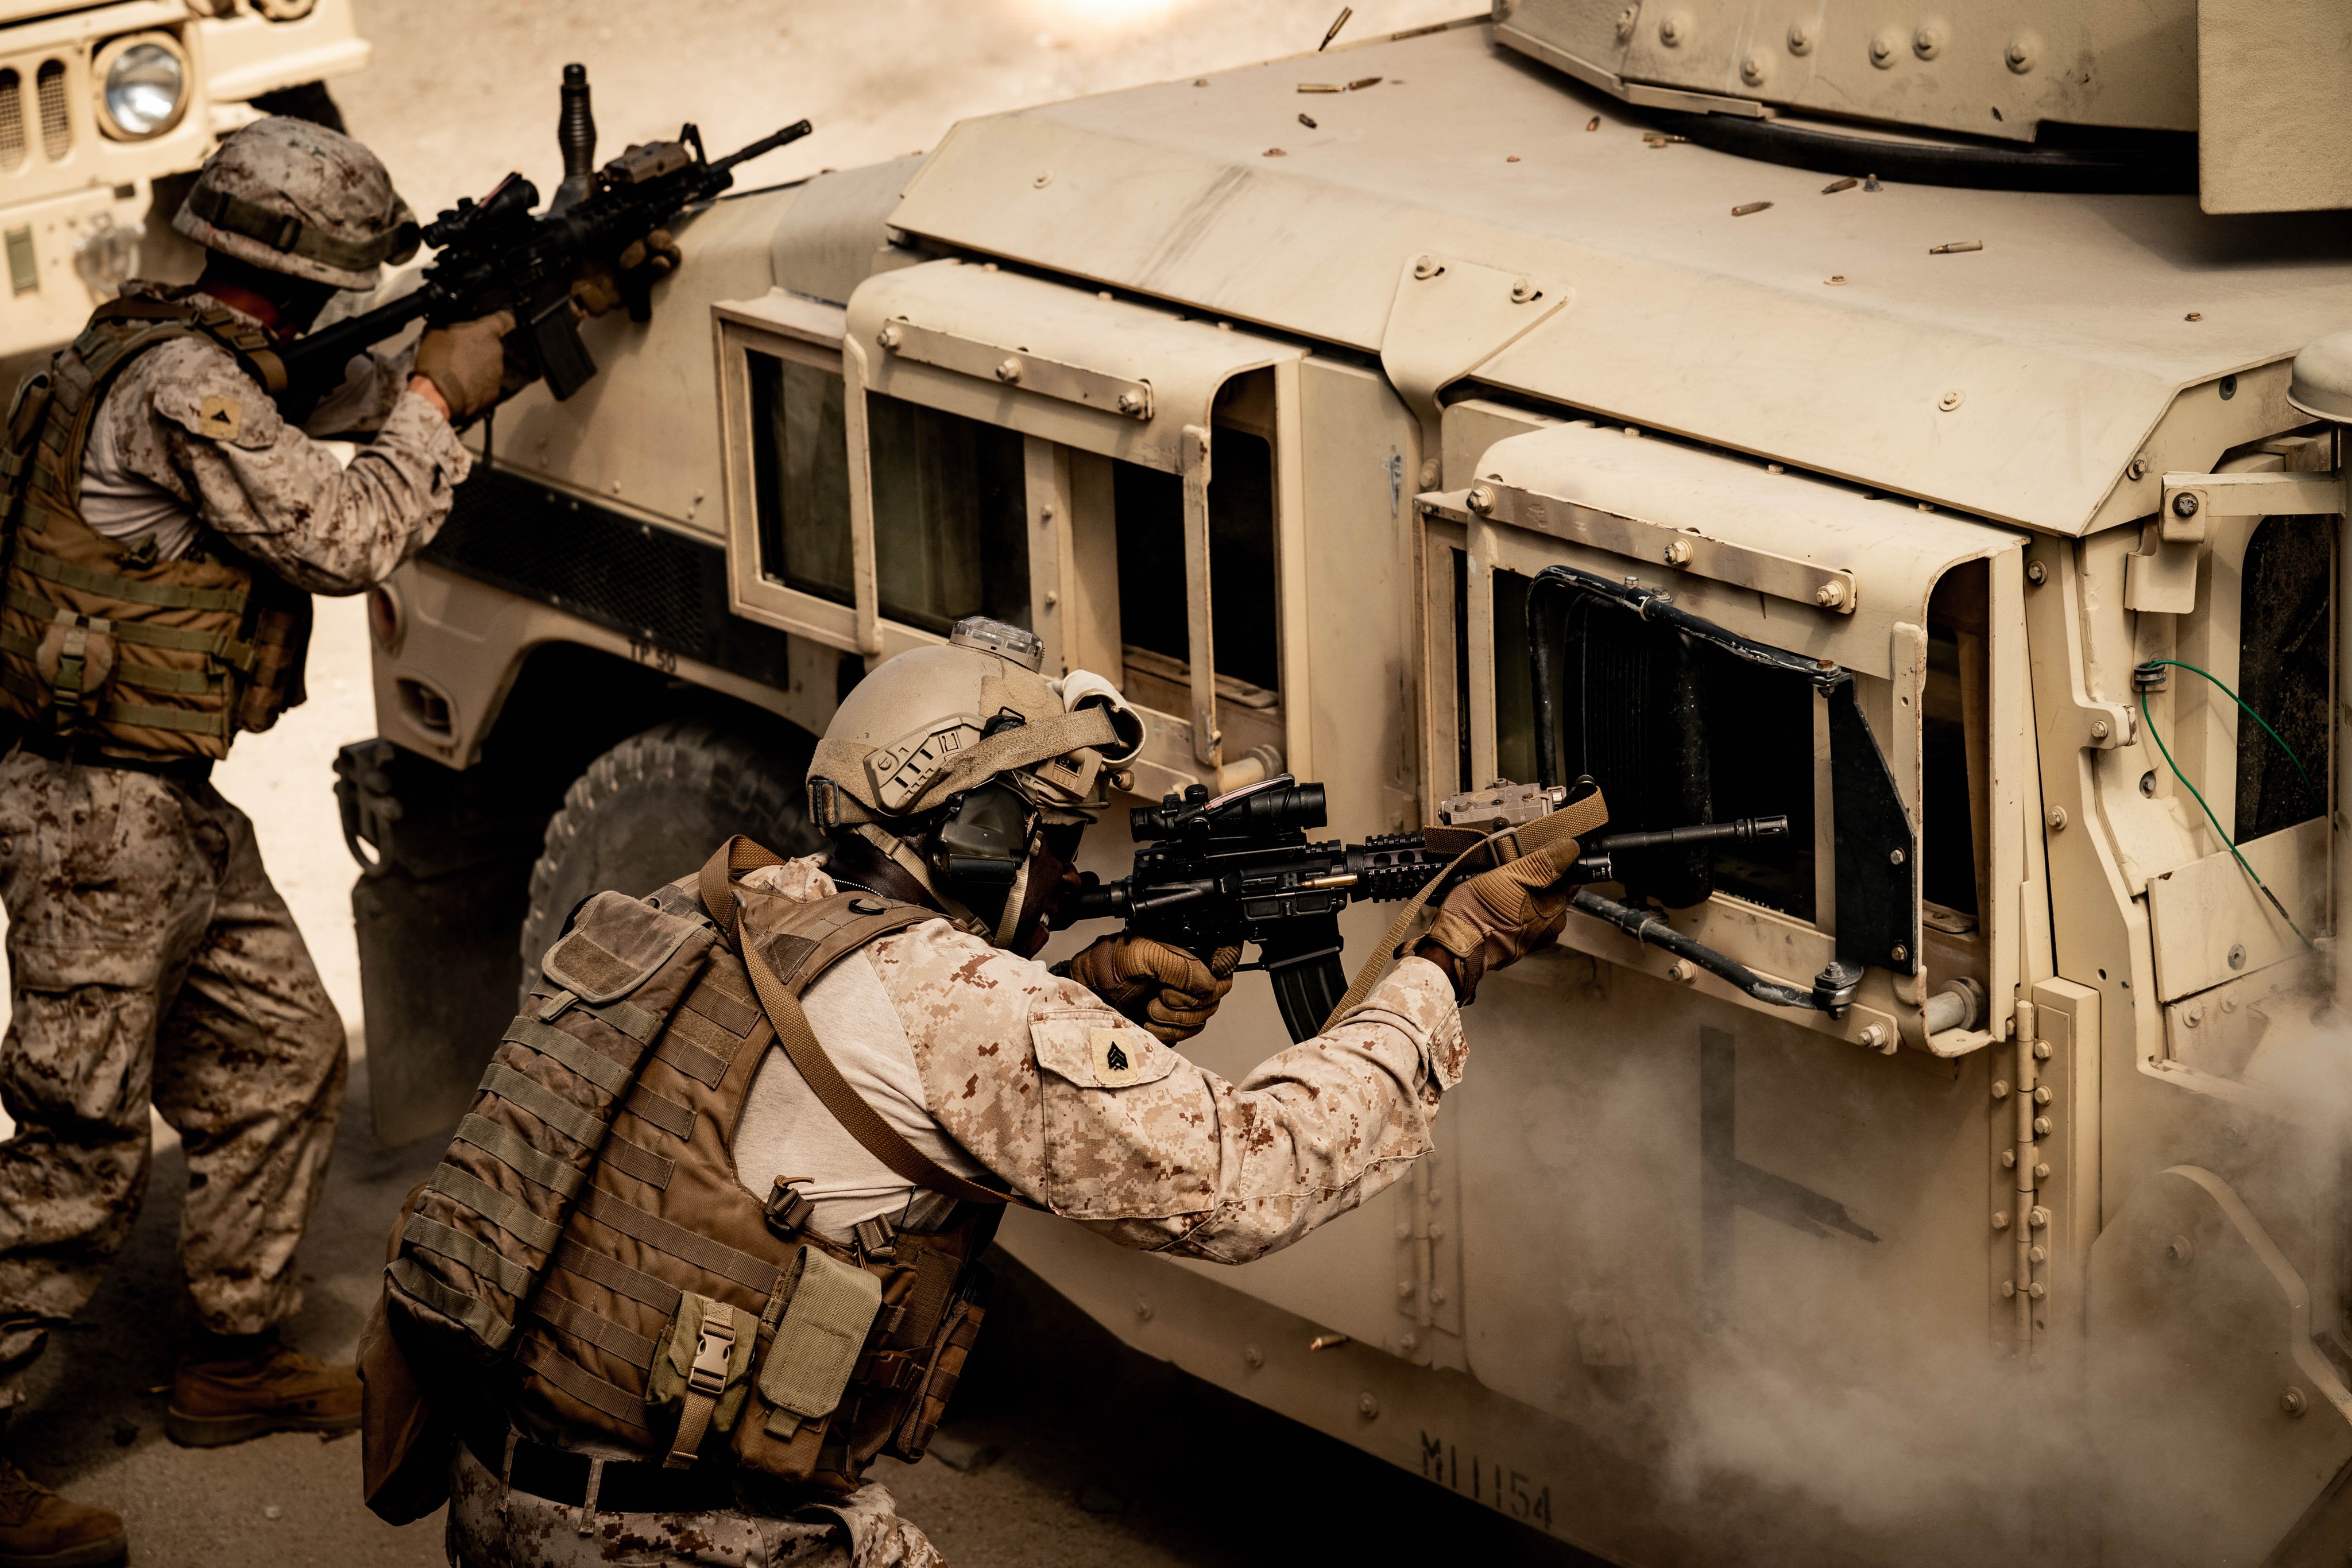 Two Marines in combat in "Mending the Line." (Blue Fox Entertainment)